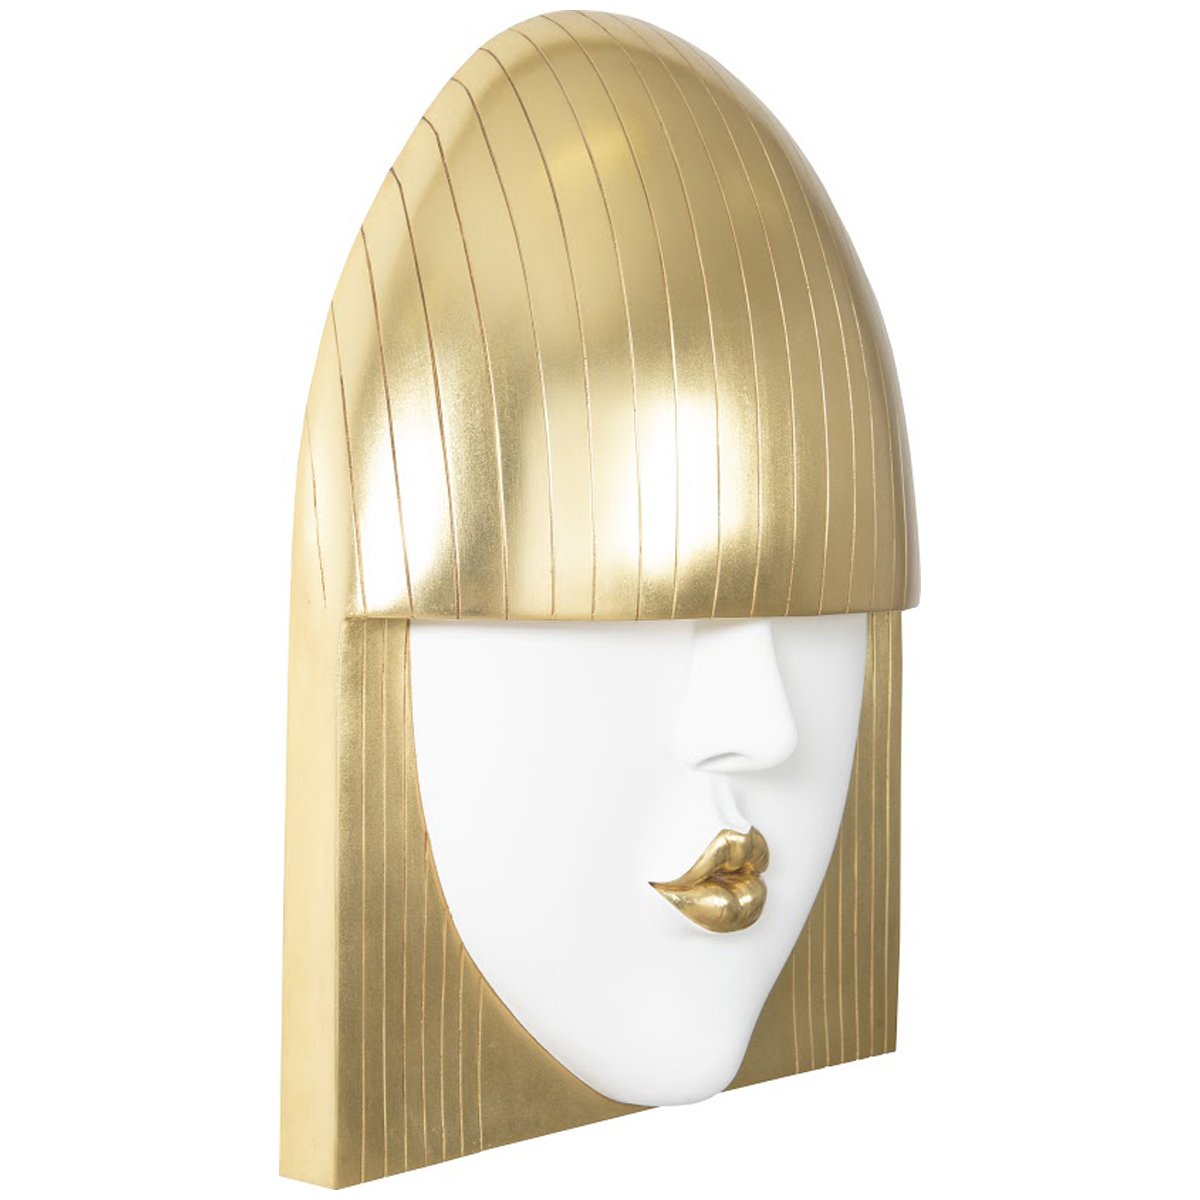 Phillips Collection Fashion Faces Wall Art, Kiss